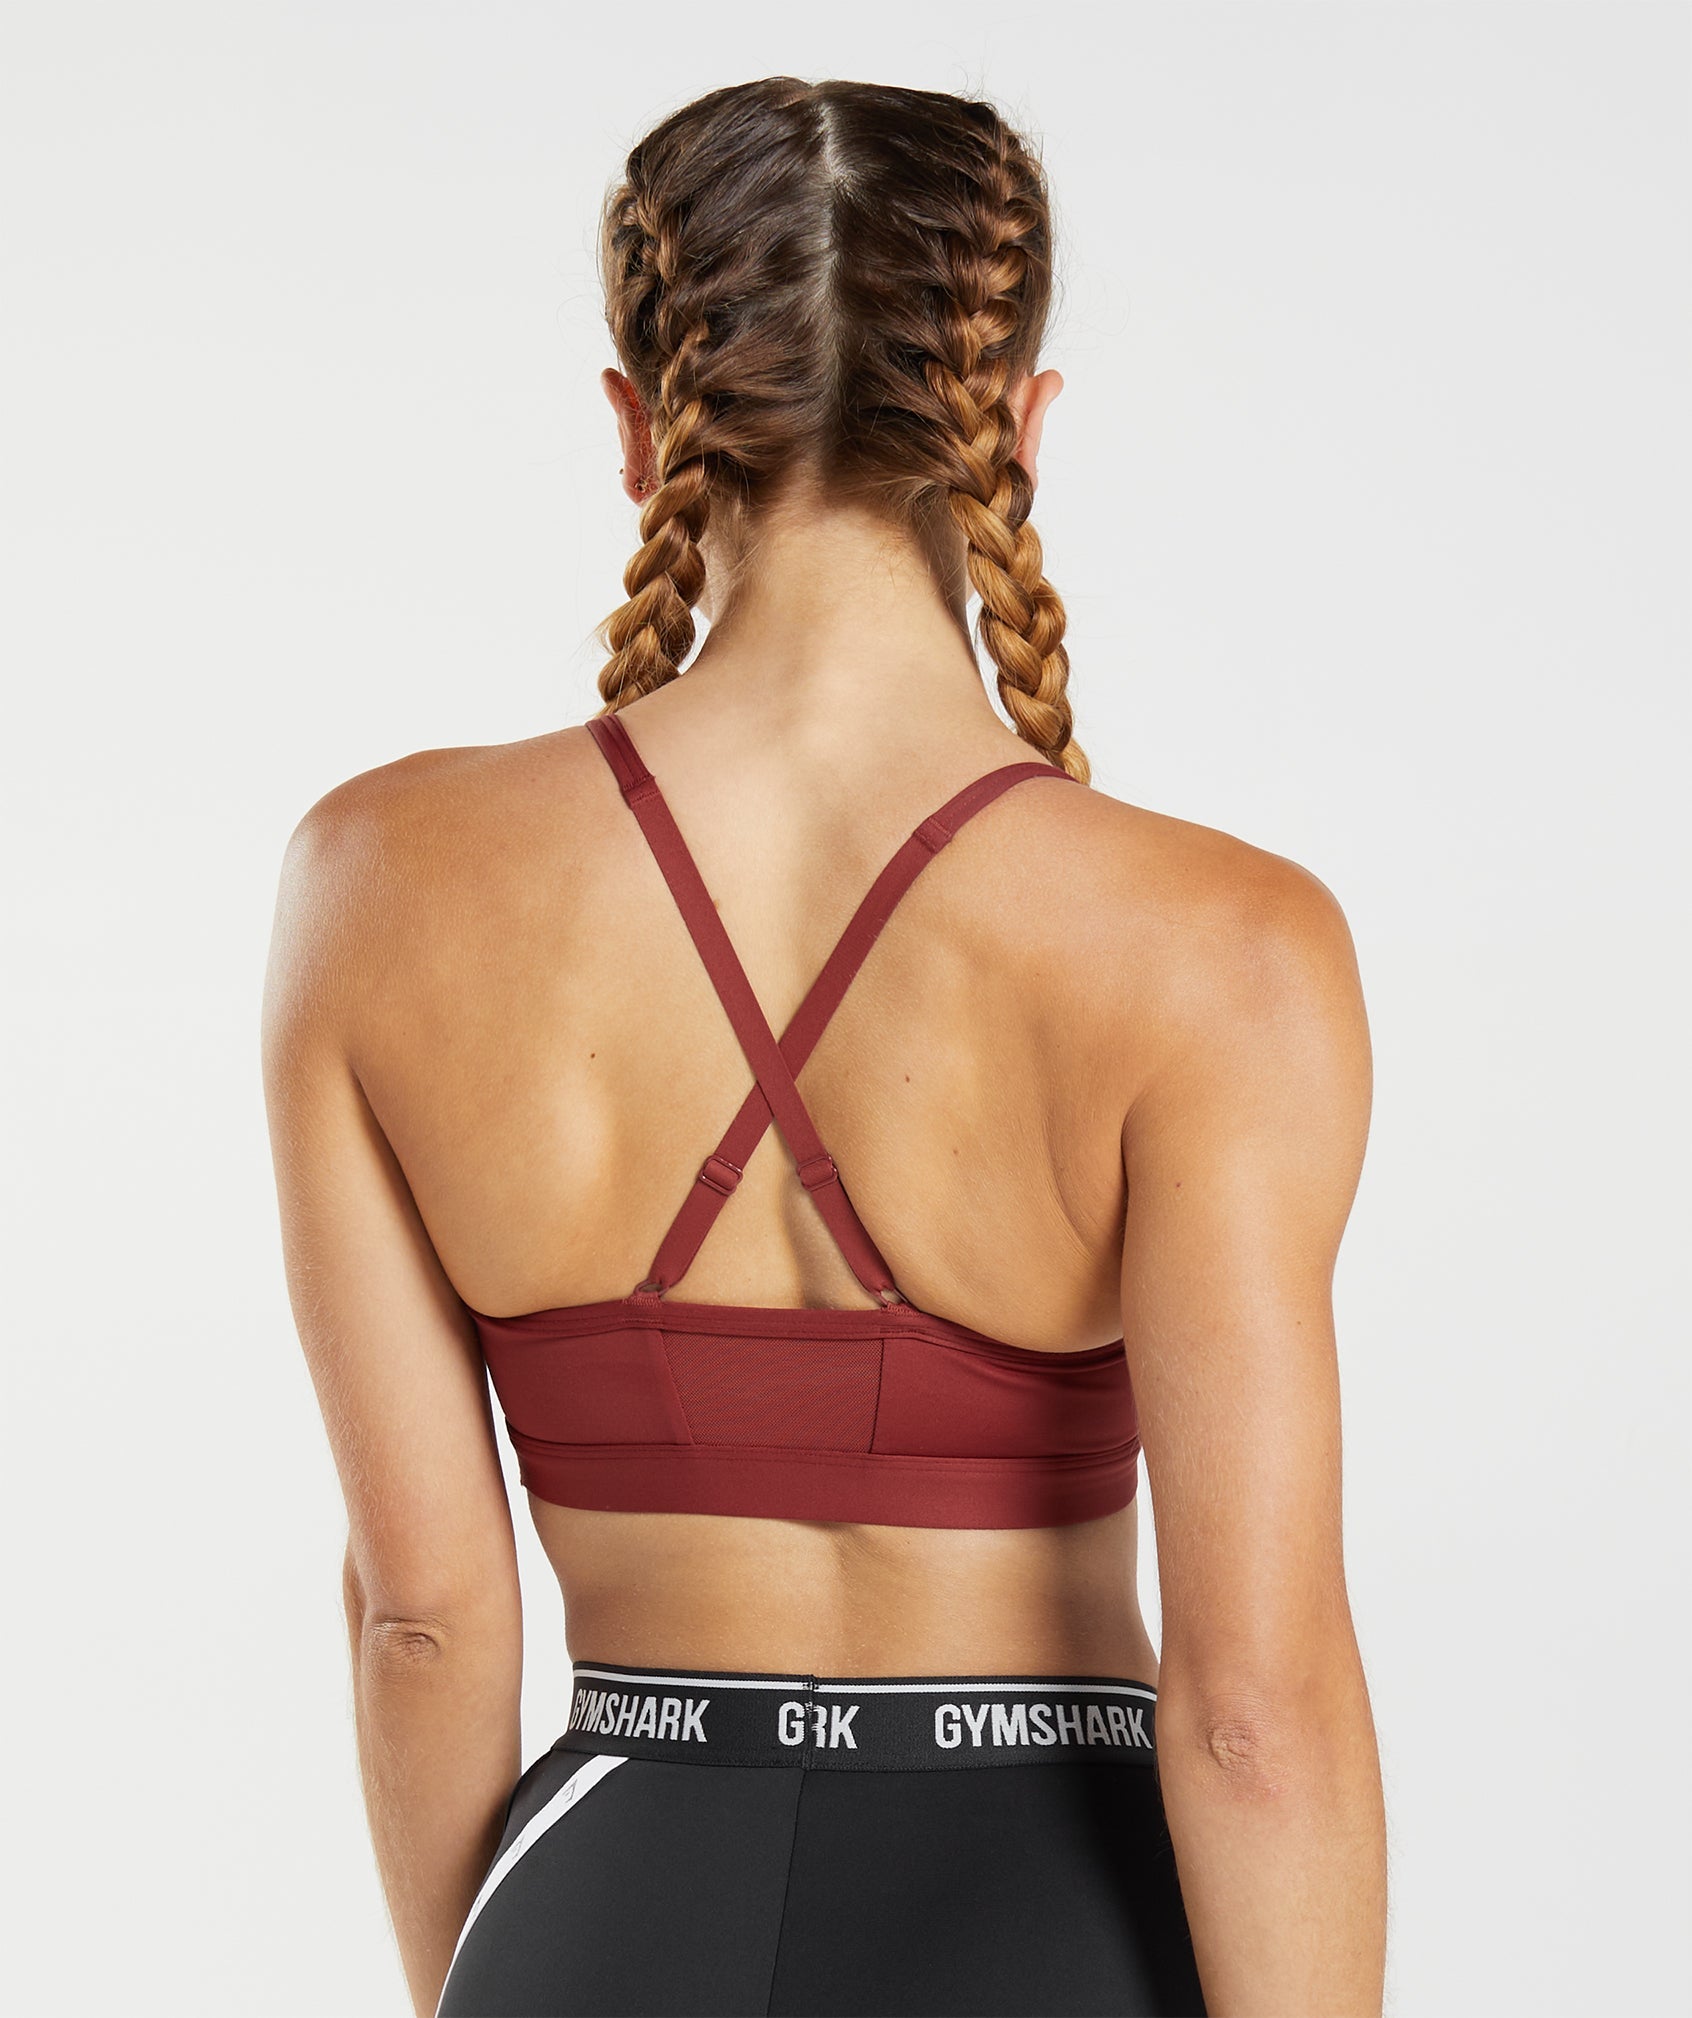 Gymshark Ruched Sports Bra Red Size L - $35 (12% Off Retail